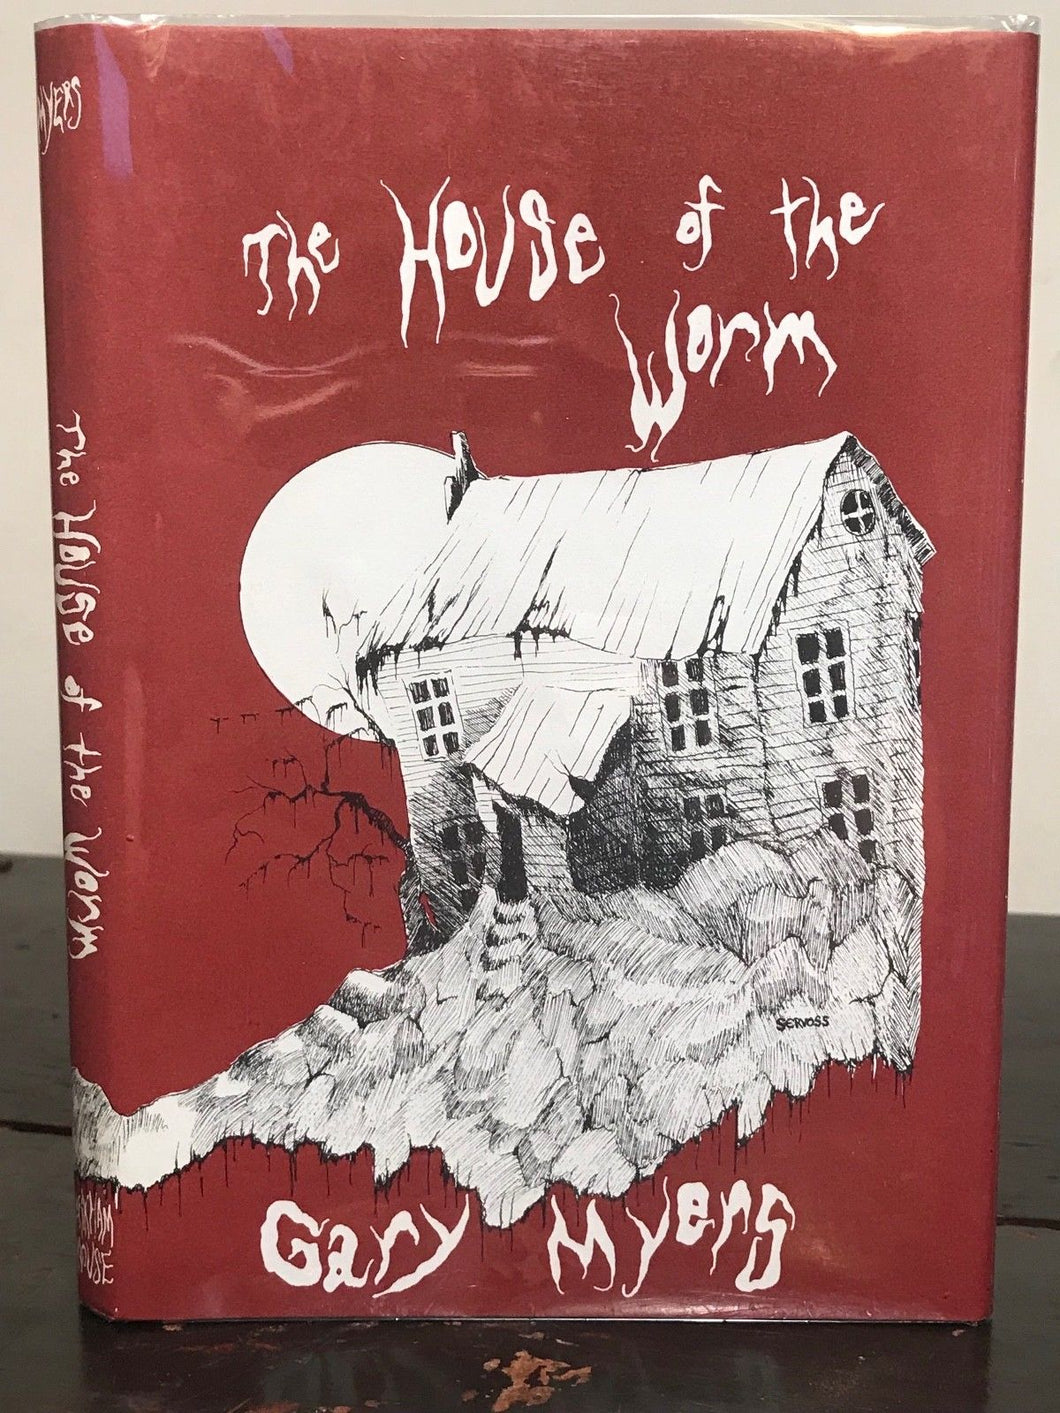 HOUSE OF THE WORM by Gary Myers - 1st edition, 1975 HC/DJ - Arkham House